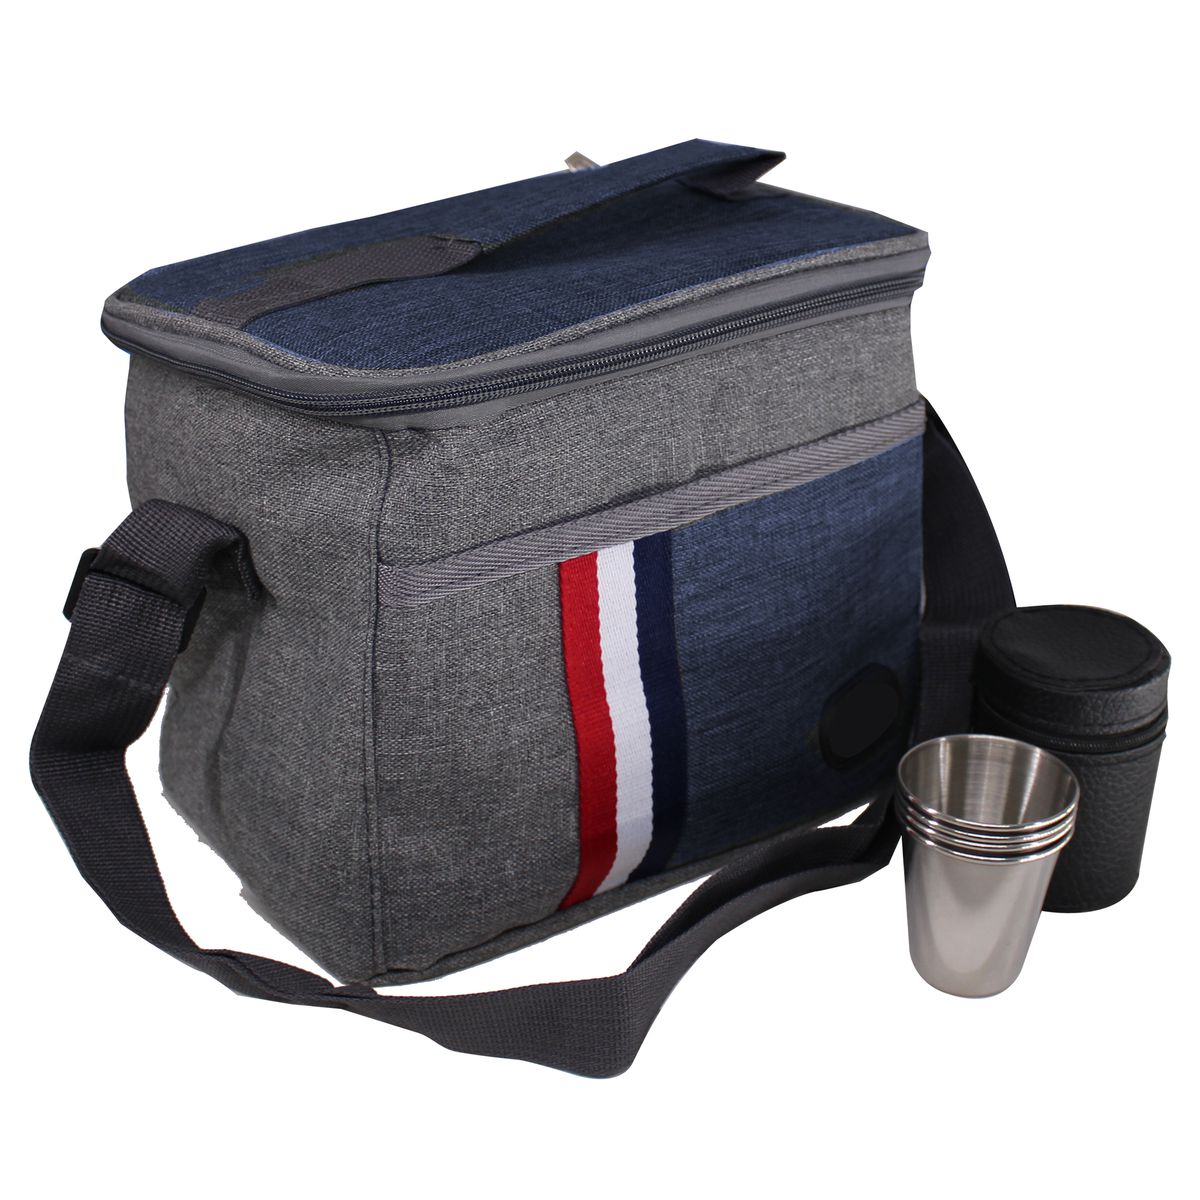 7 more 8 Liter Insulated Lunch Cooler Bag & 4 x 80ml S. Steel Travel Cups In Pouch